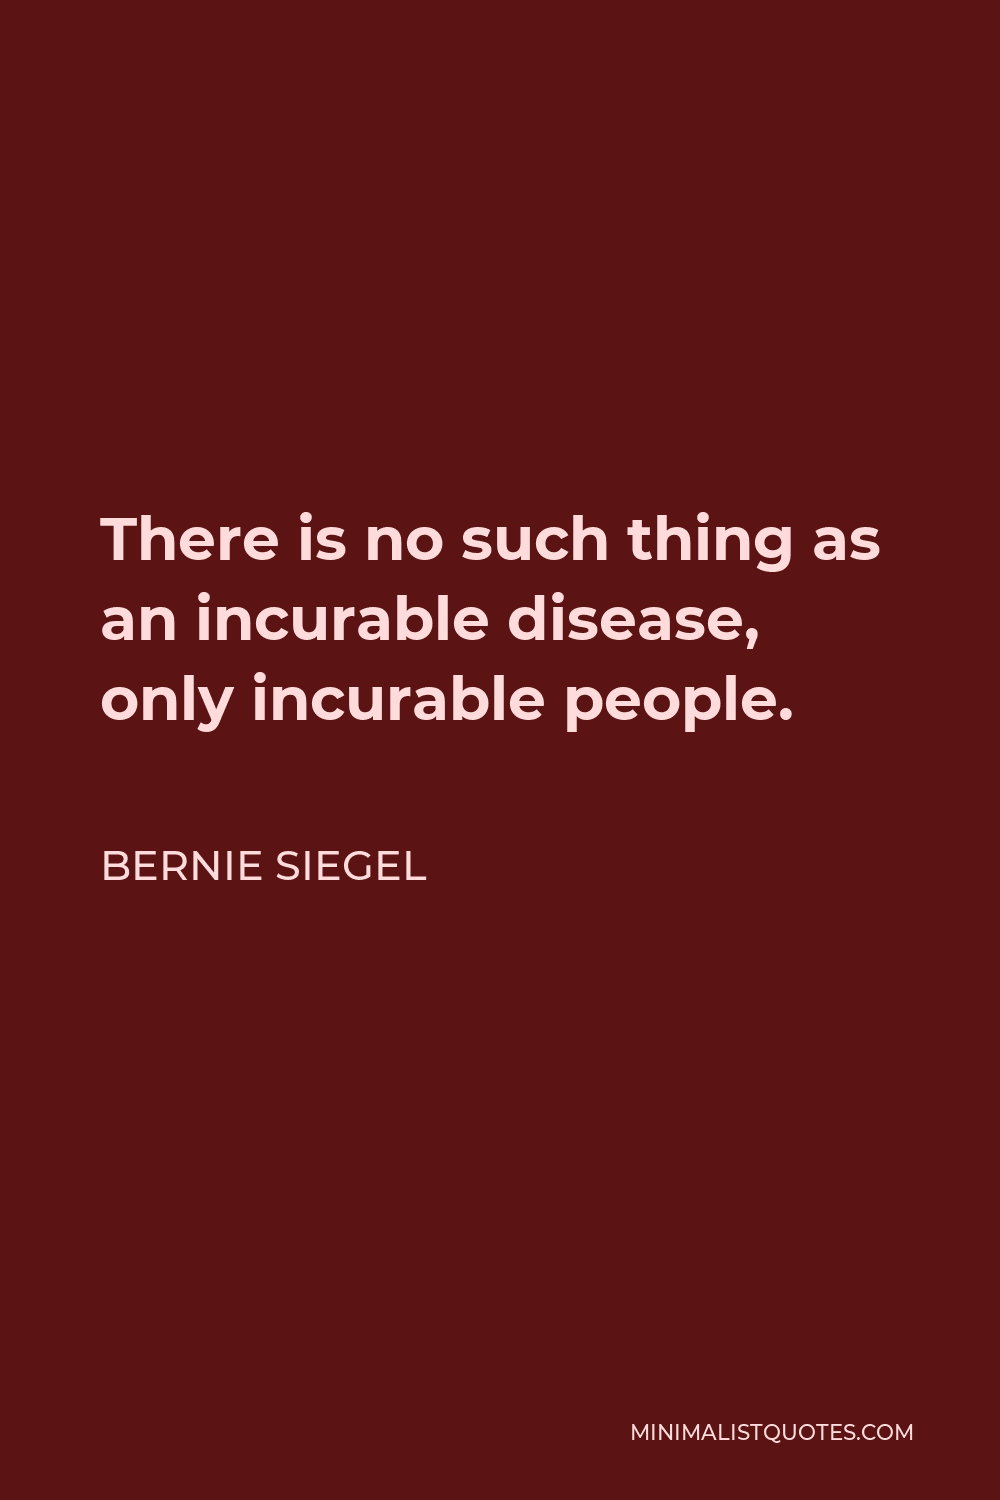 Bernie Siegel Quote - There is no such thing as an incurable disease, only incurable people.